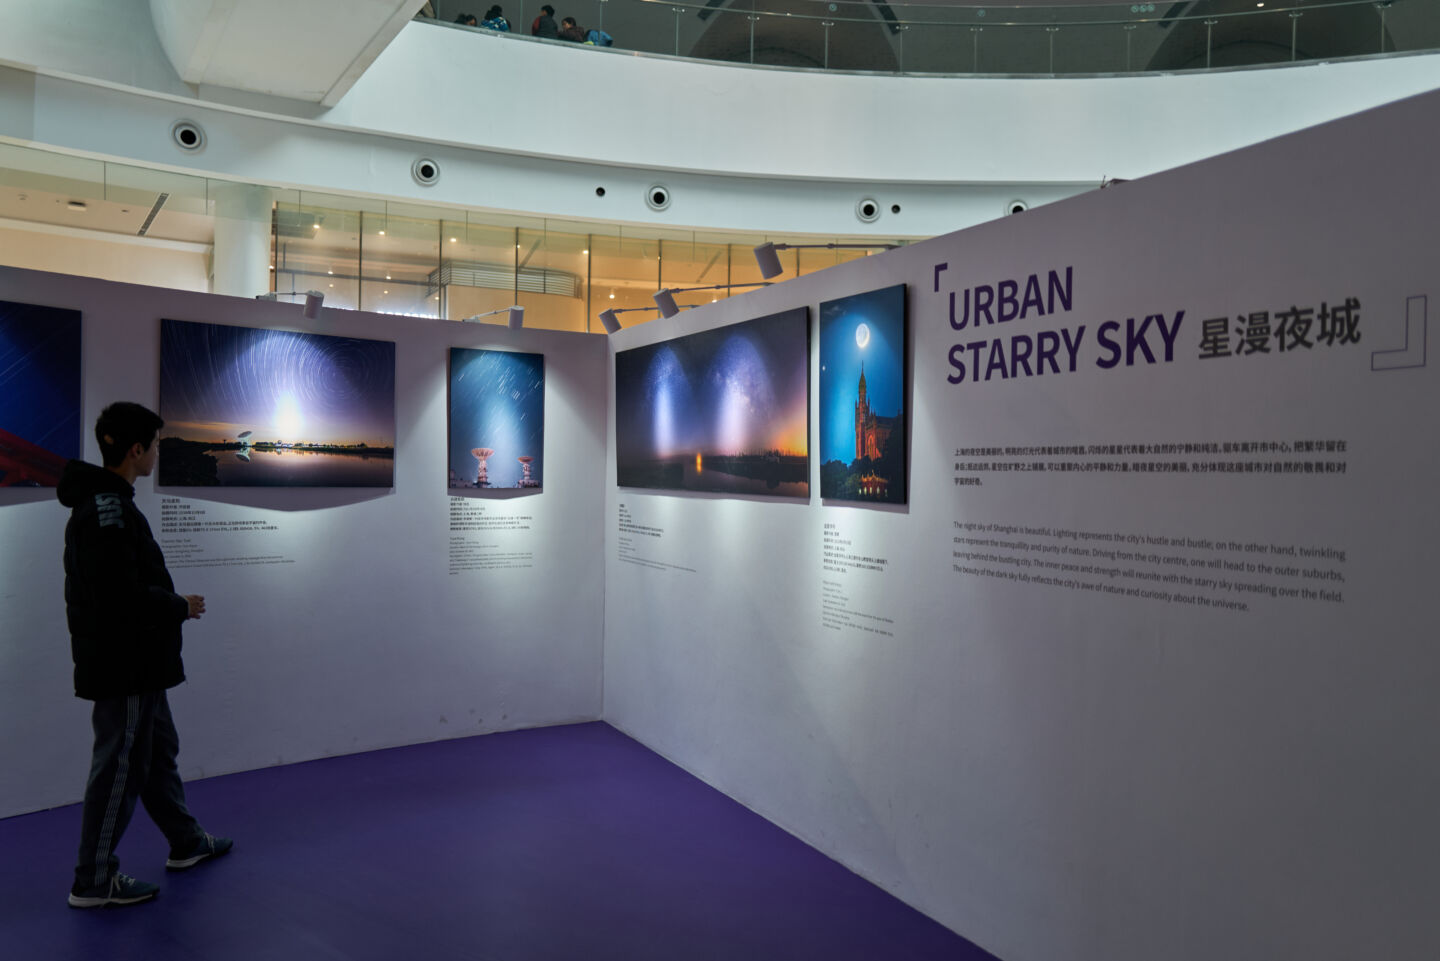 "Urban Starry Sky" section